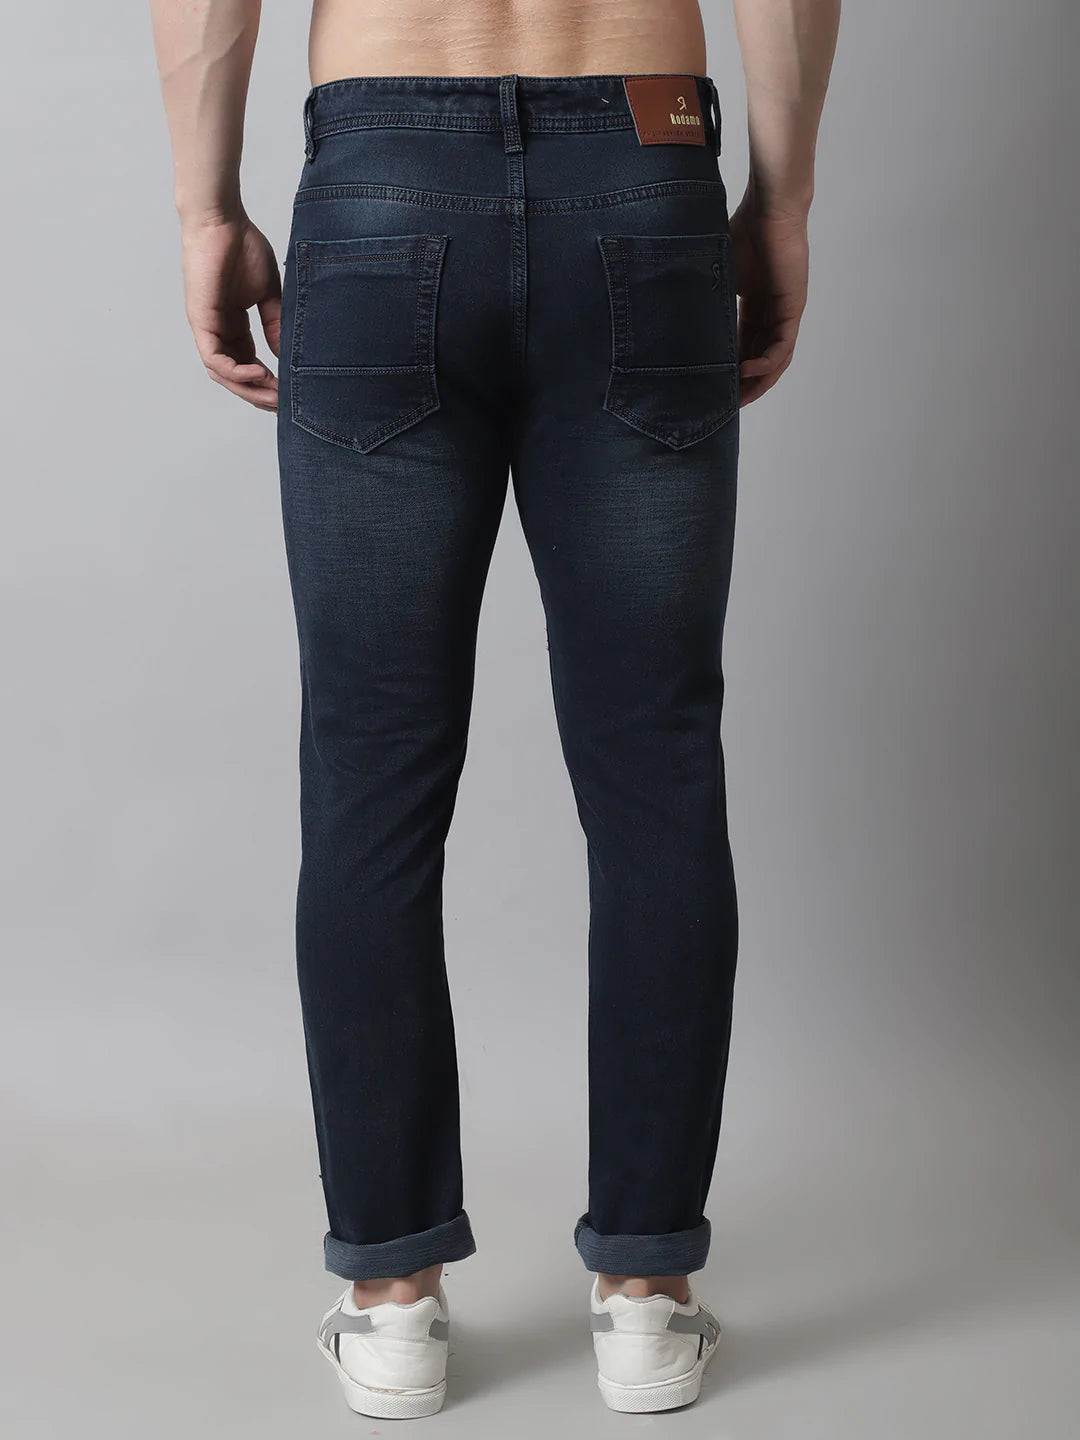 What are cotton jeans and denim jeans? - Quora